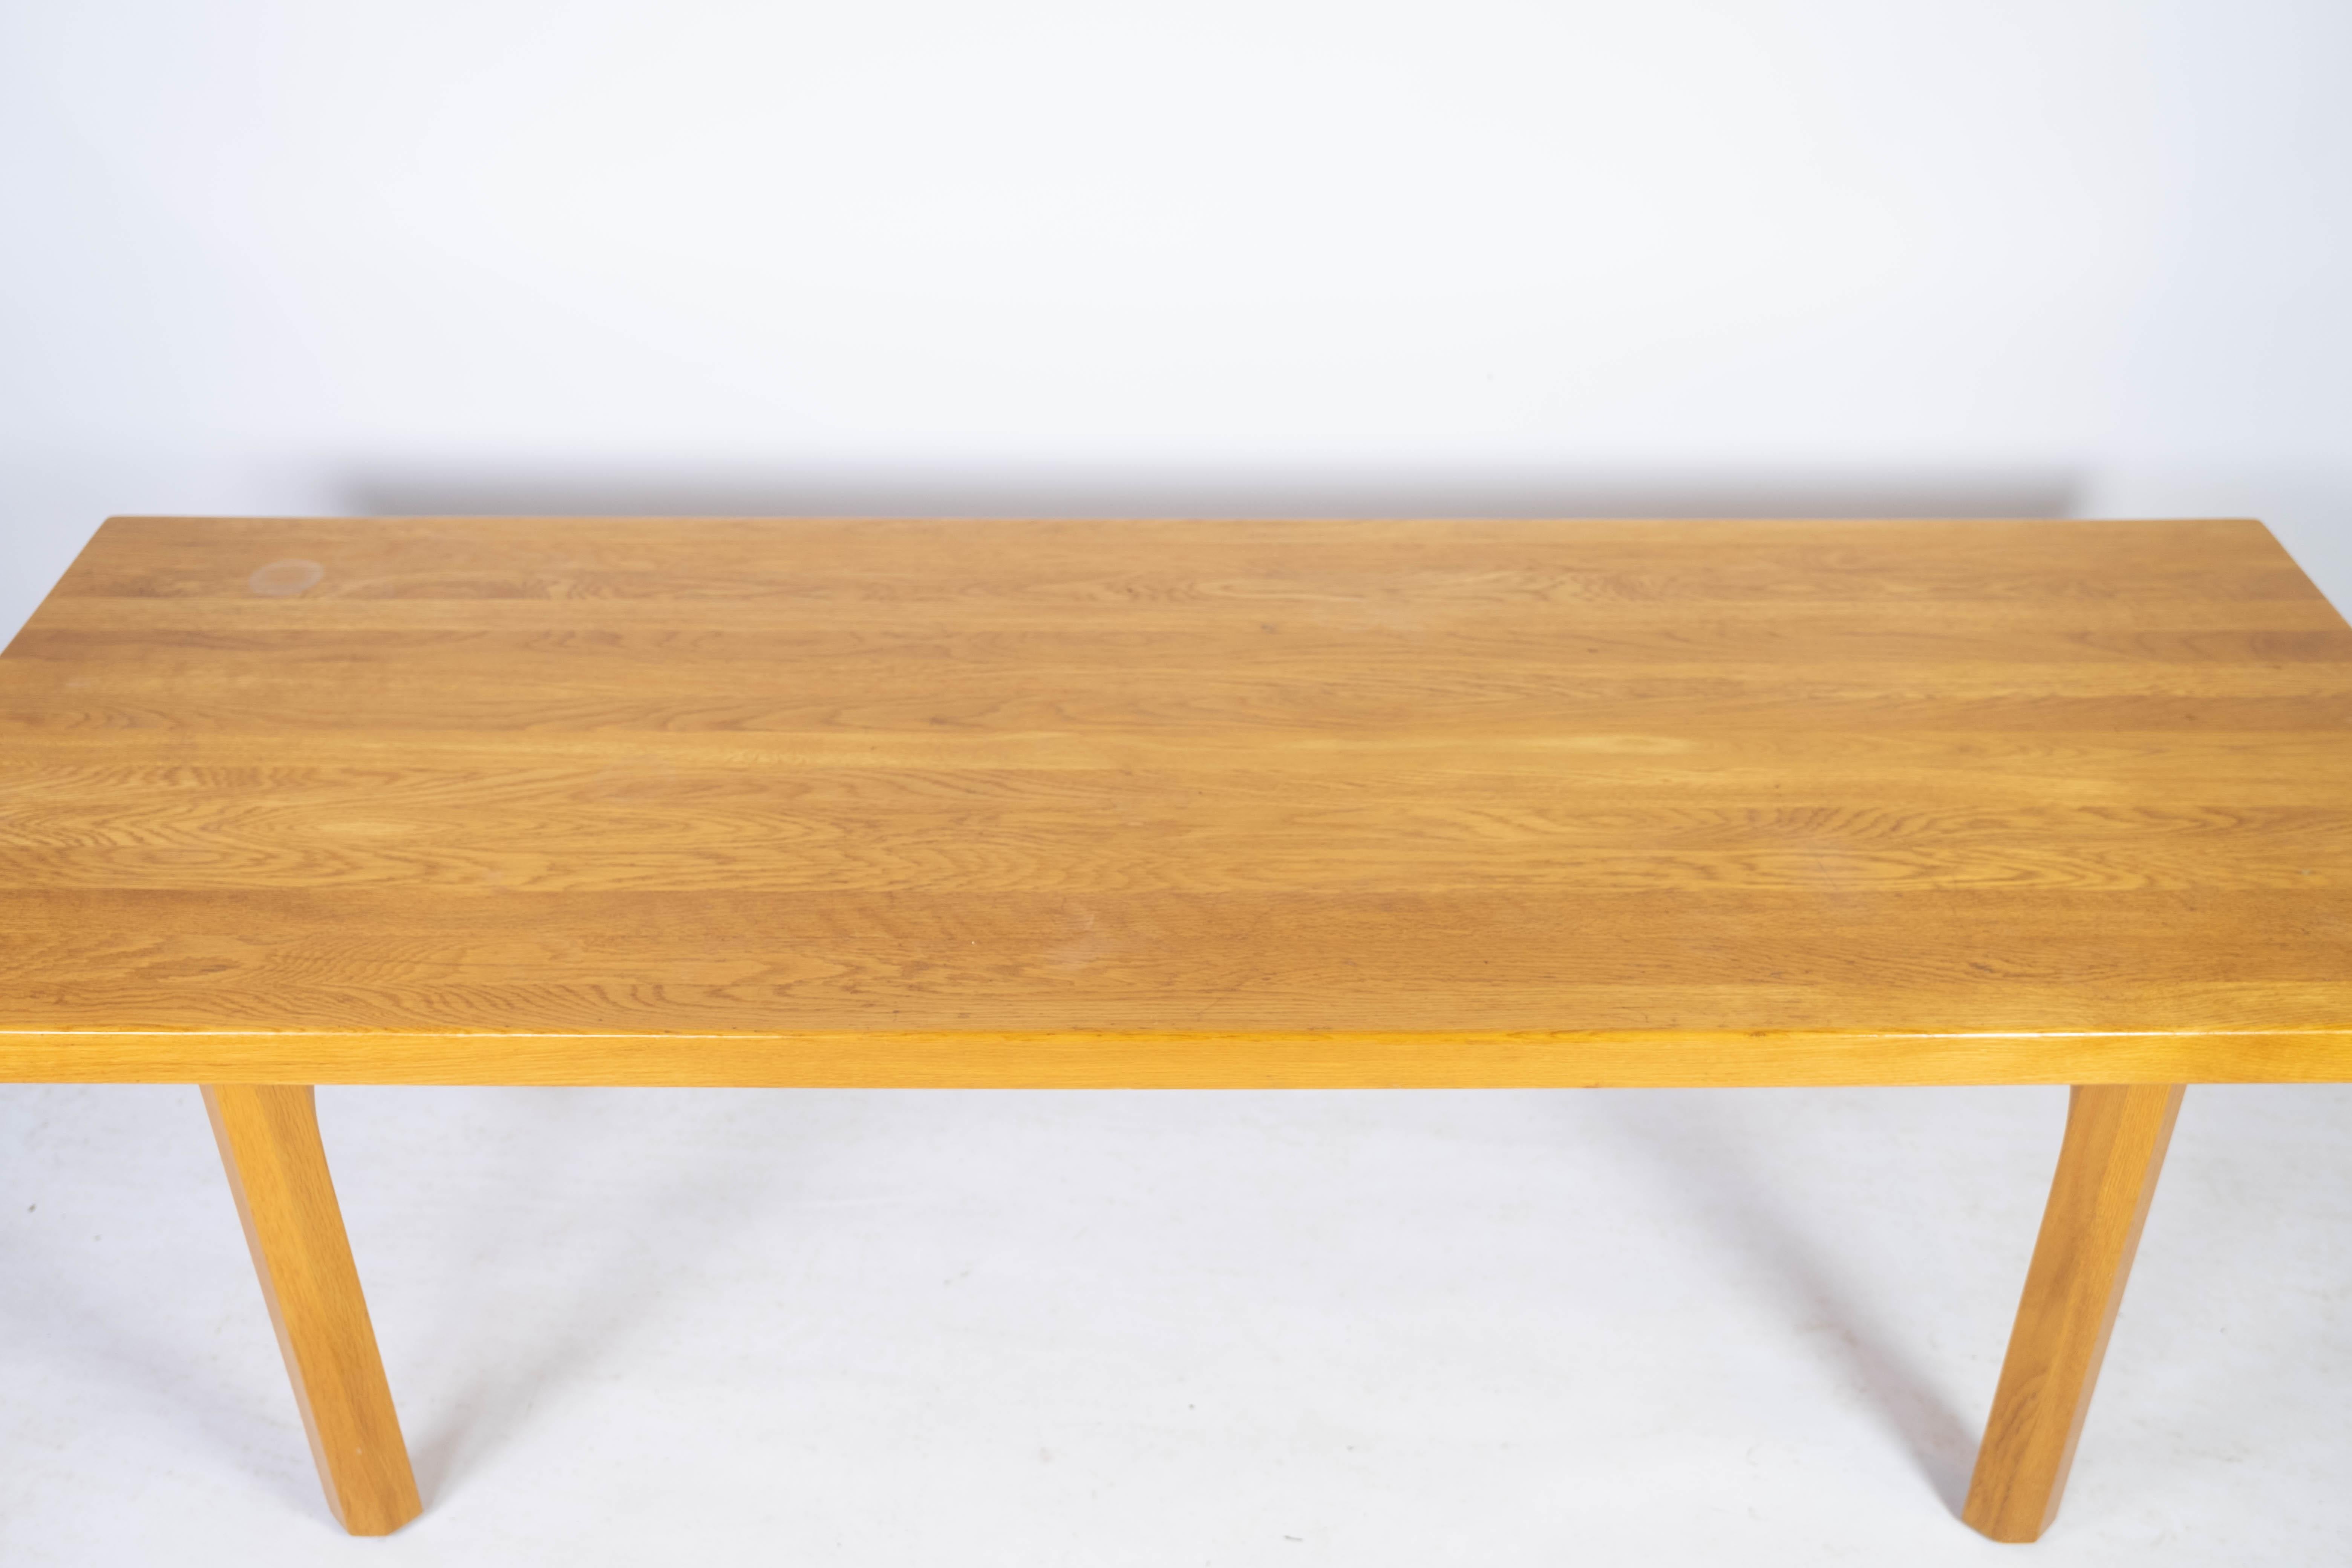 This coffee table from the 1960s is a good example of Danish design and aesthetics. Made from solid oak, it exudes a timeless elegance and durability that characterizes furniture from this era. The table's simple, clean lines and natural wood